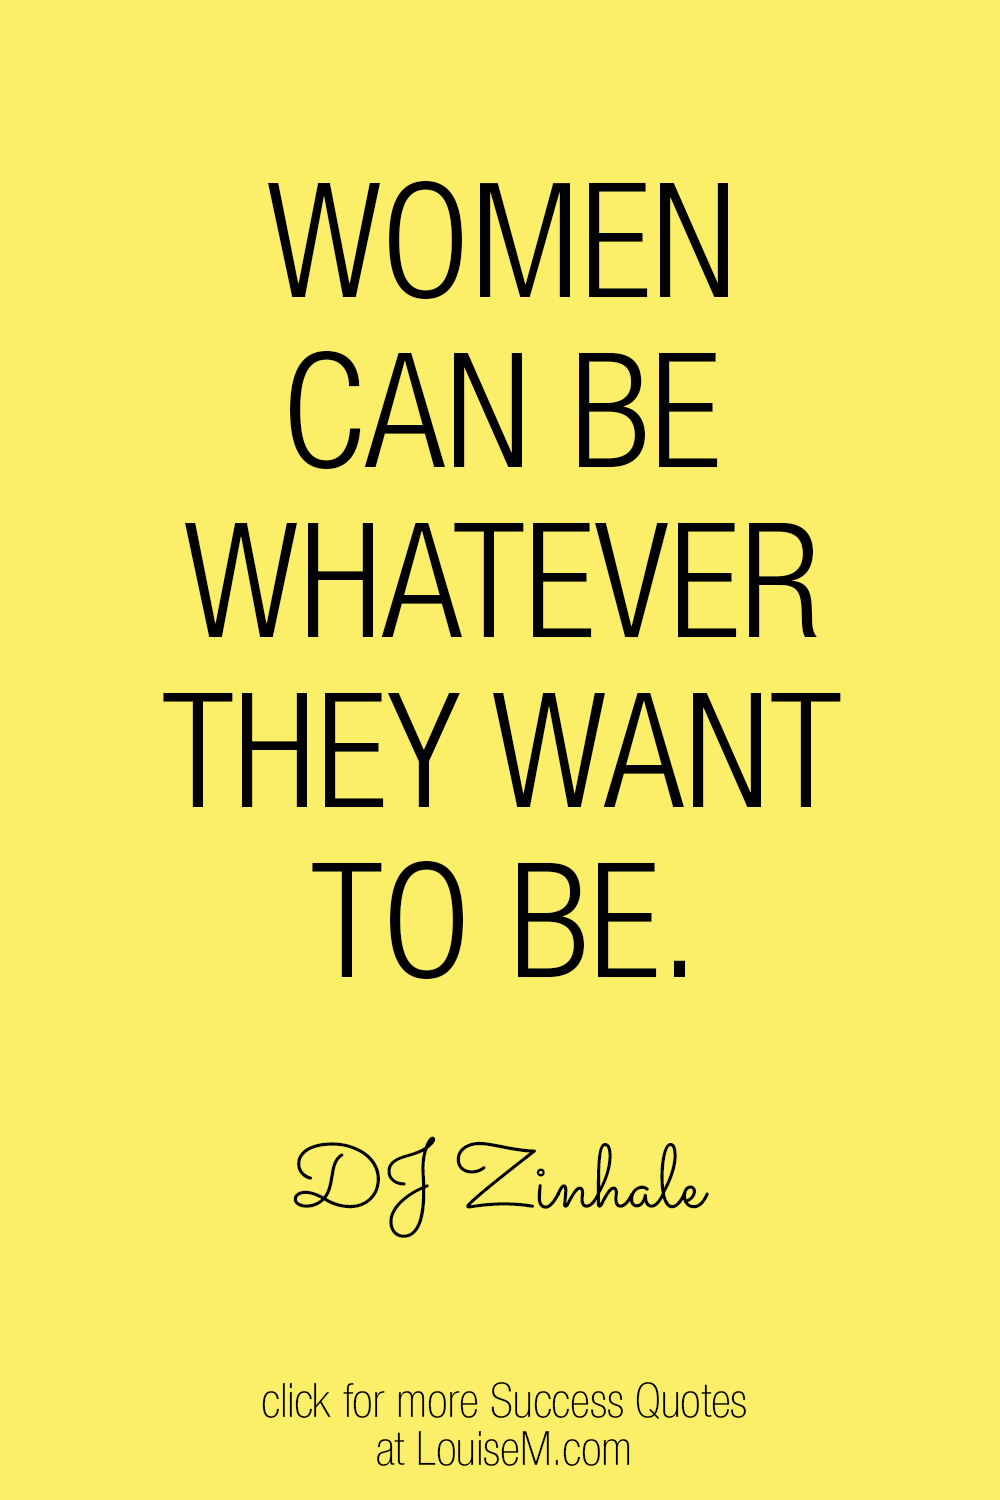 women can be whatever they want to be quote on yellow background